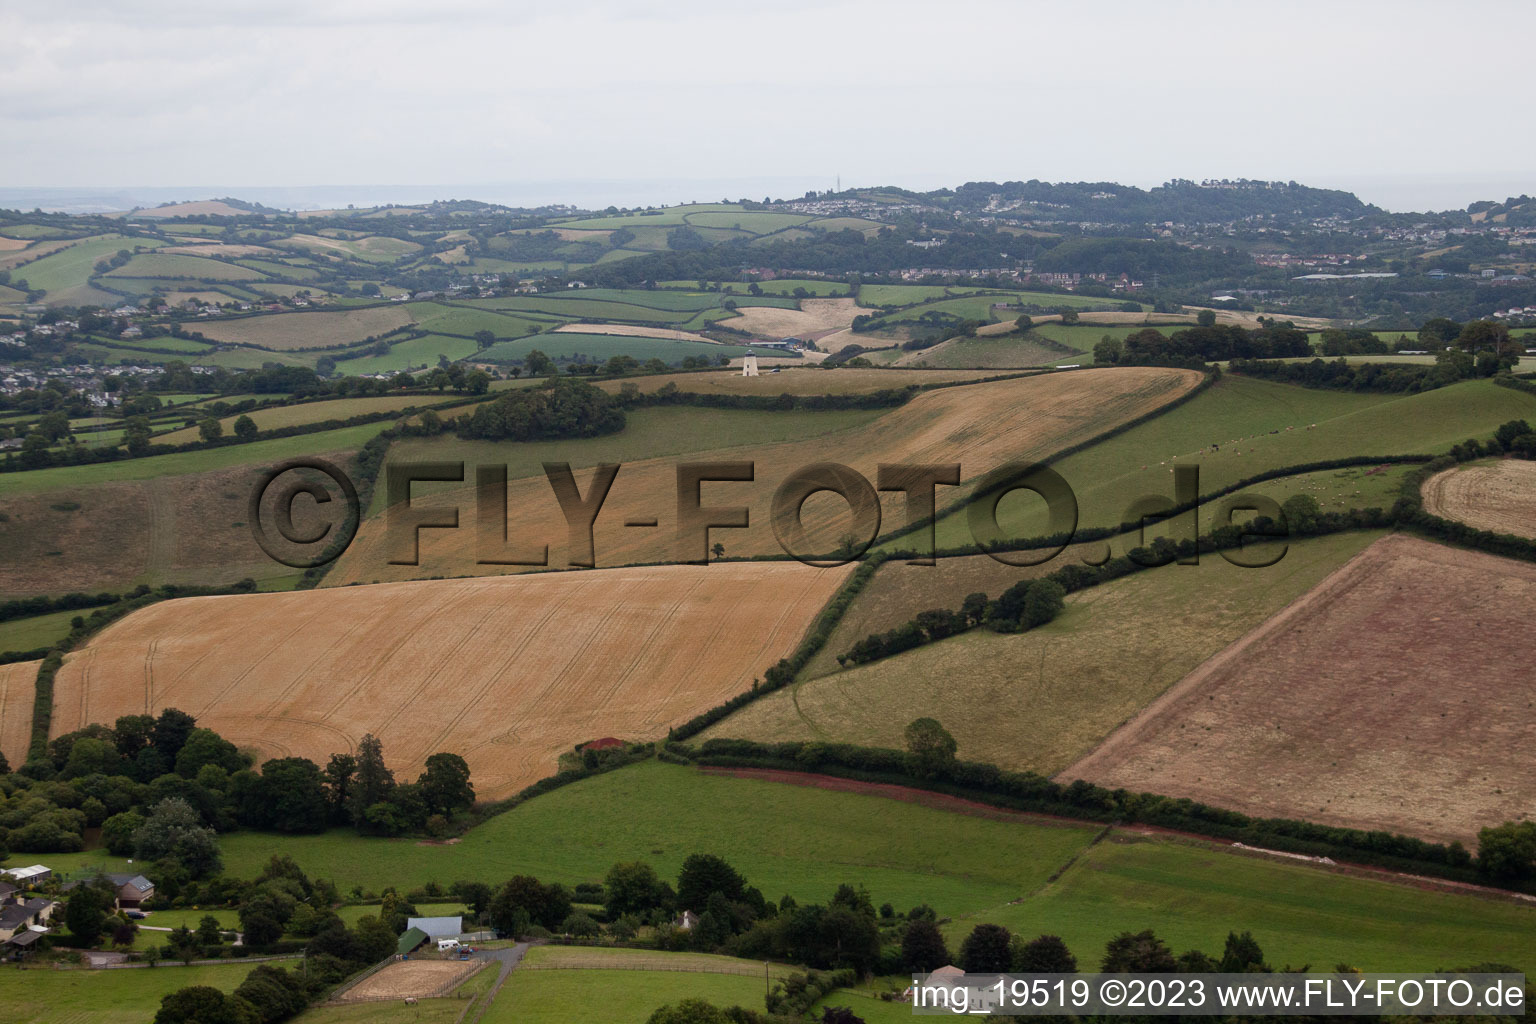 Marldon in the state England, Great Britain from the drone perspective